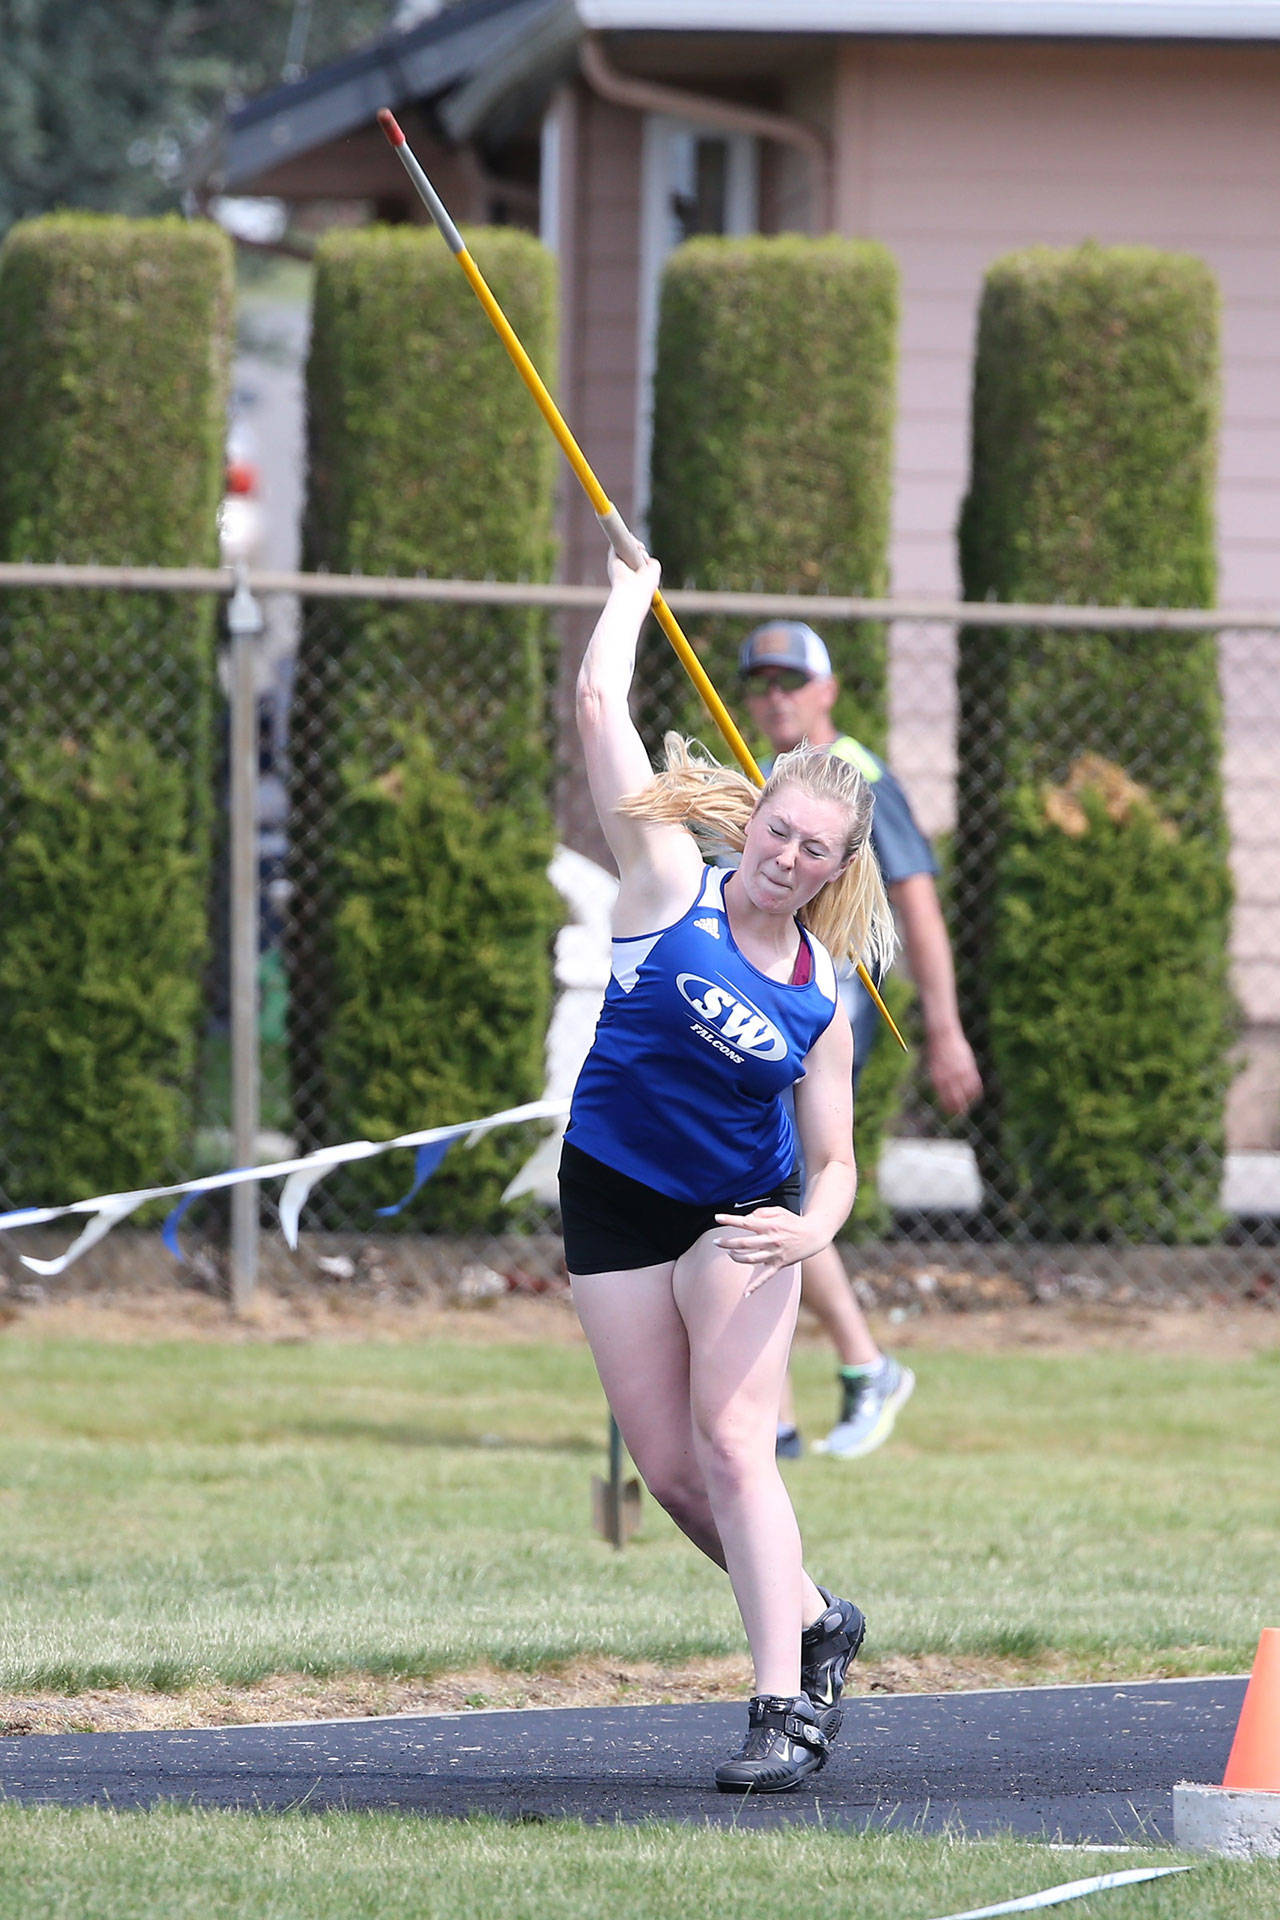 Maddy Drye lets the javelin fly.(Photo by John Fisken)